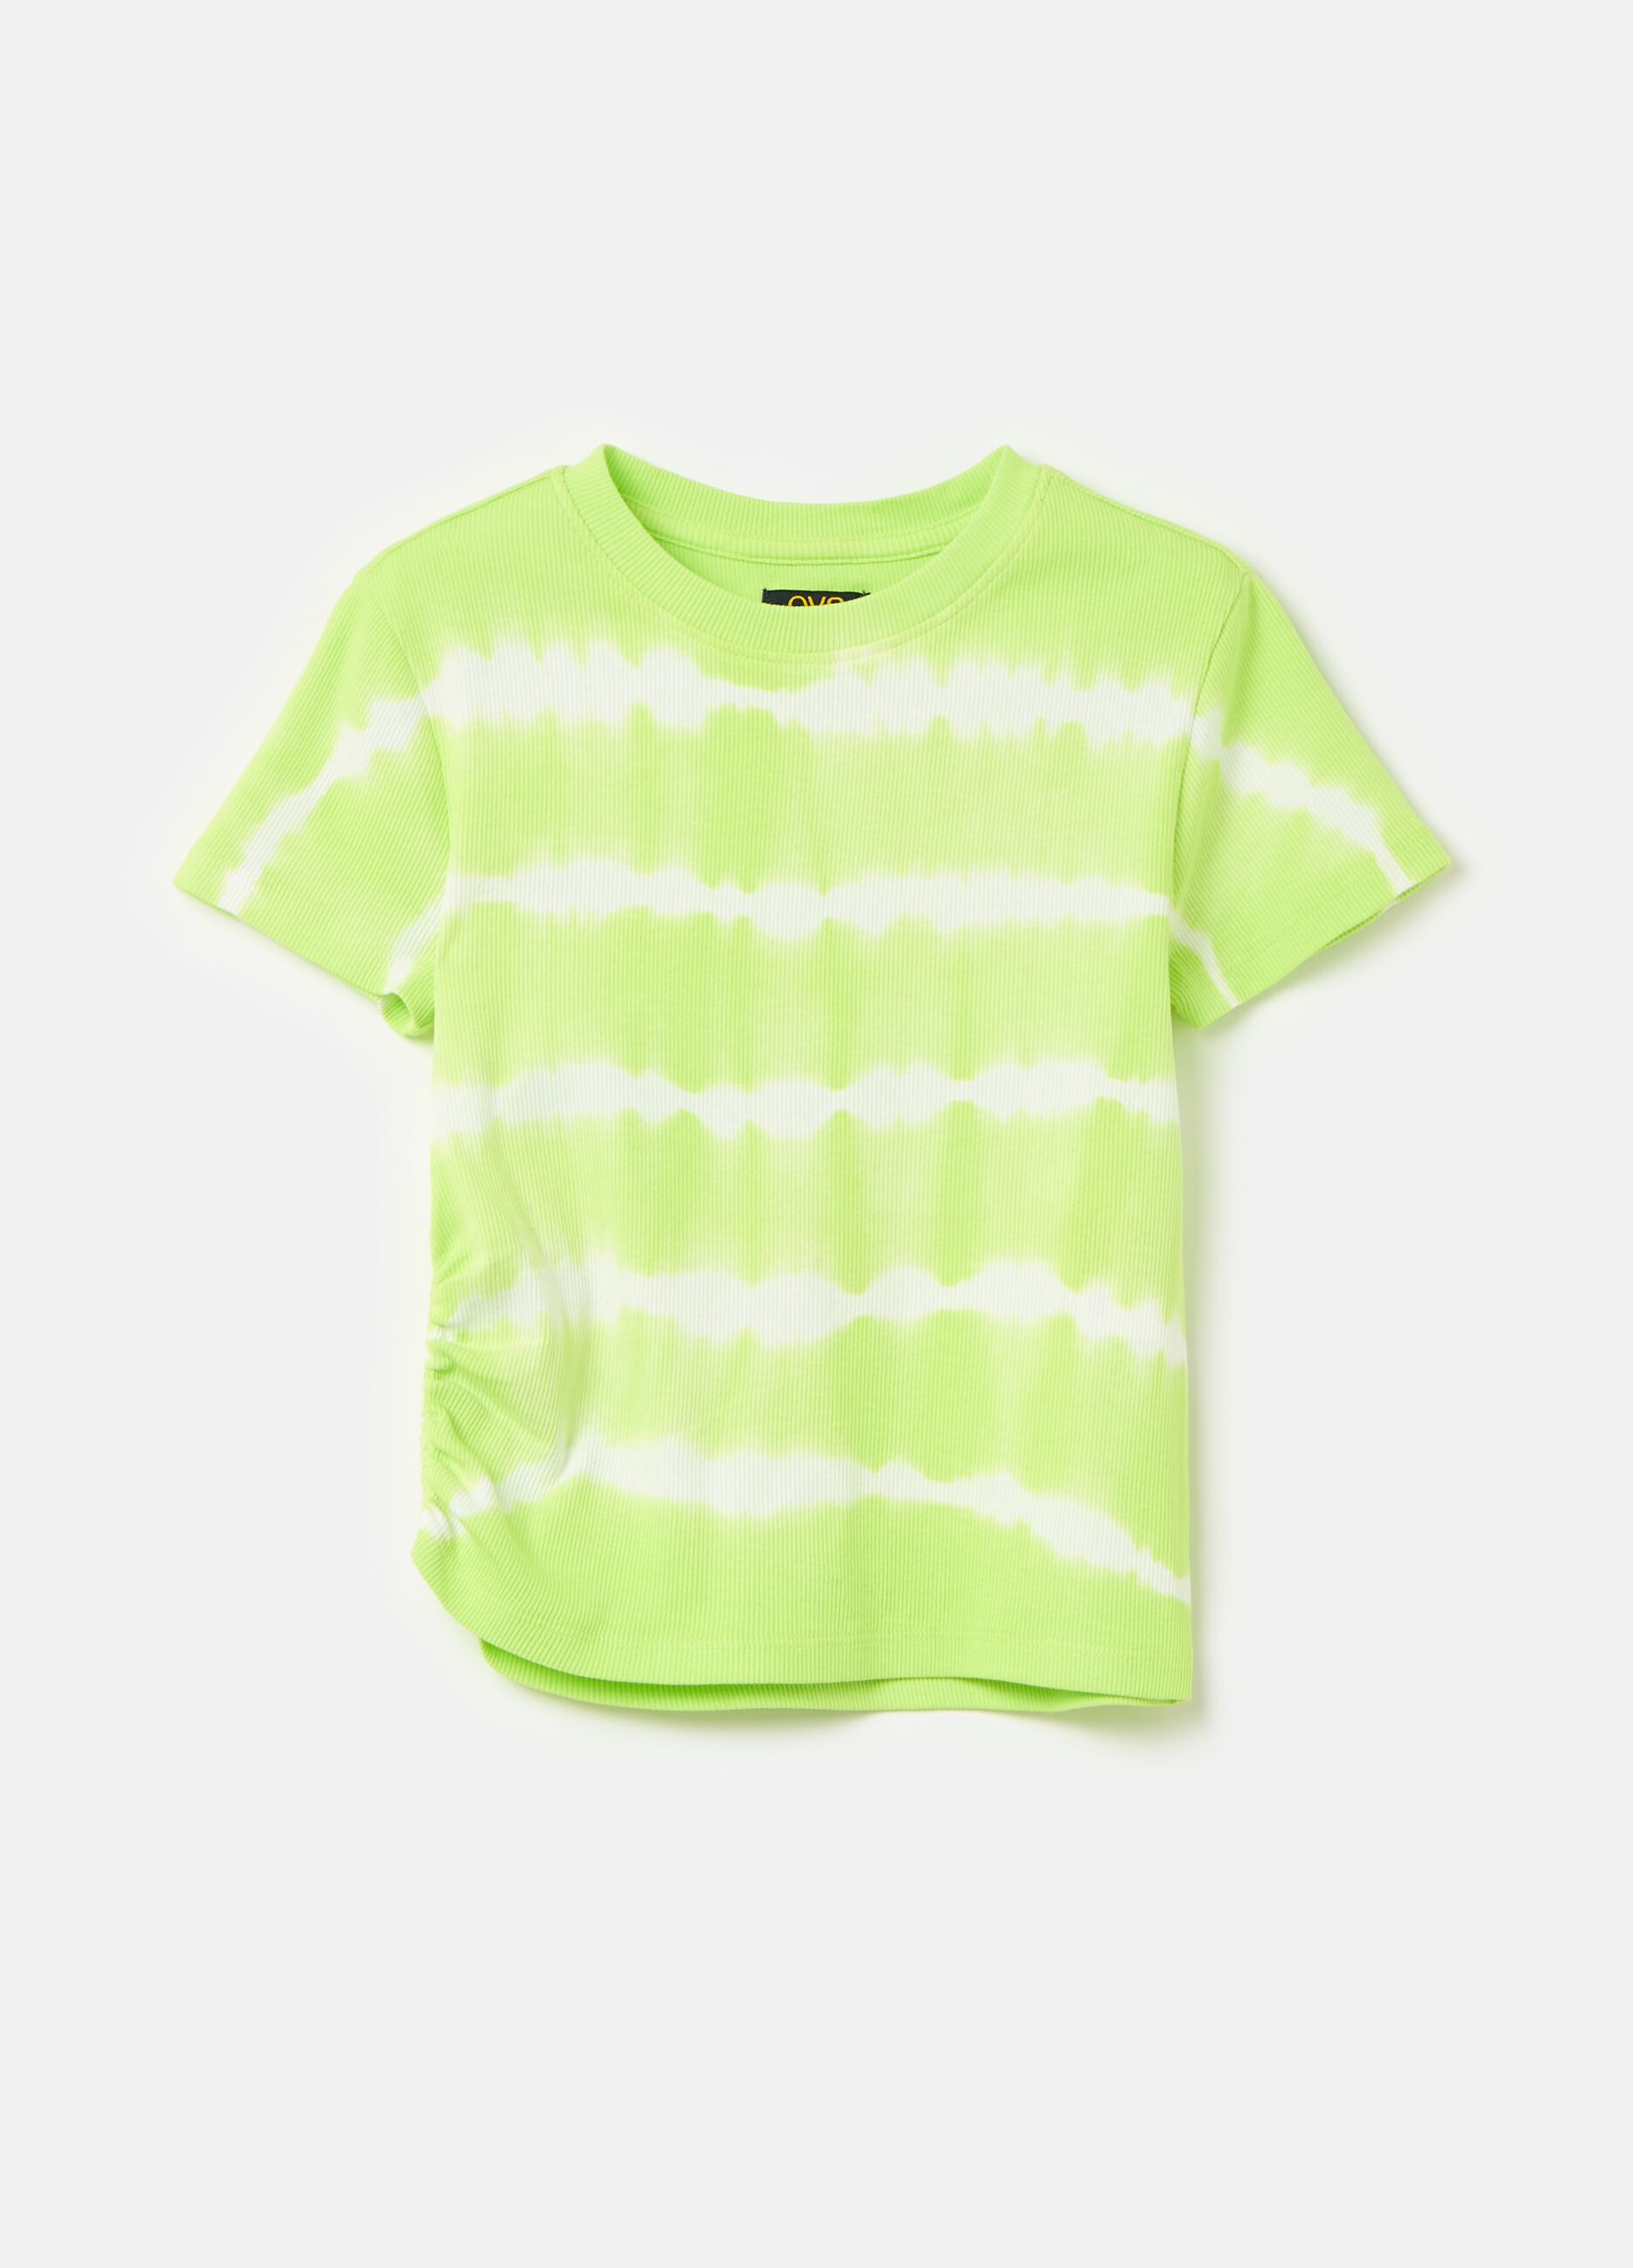 Ribbed T-shirt with tie-dye pattern